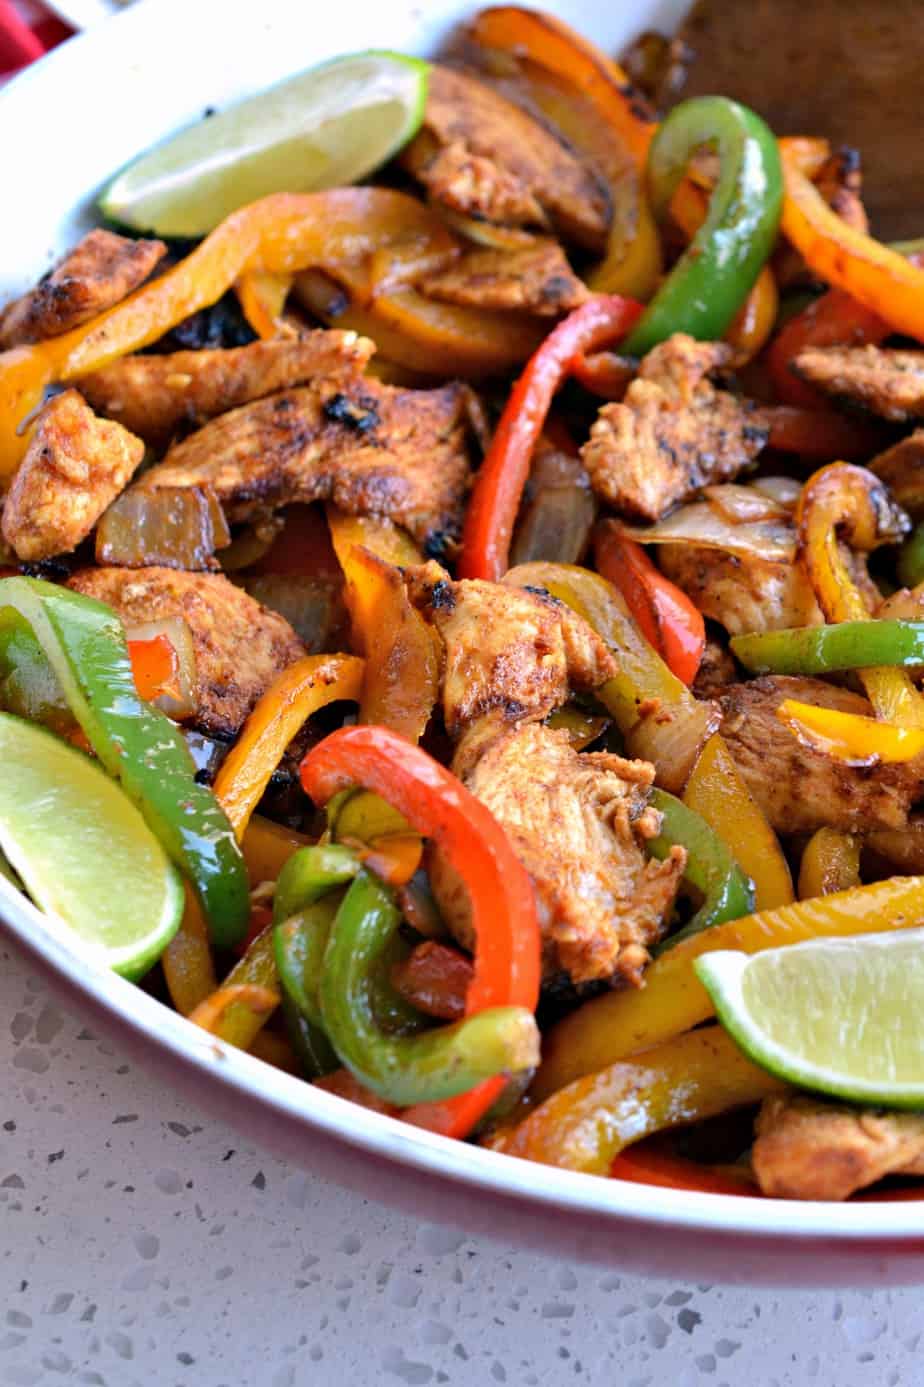 You are going to love these easy, delicious and flavorful Chicken Fajitas. 